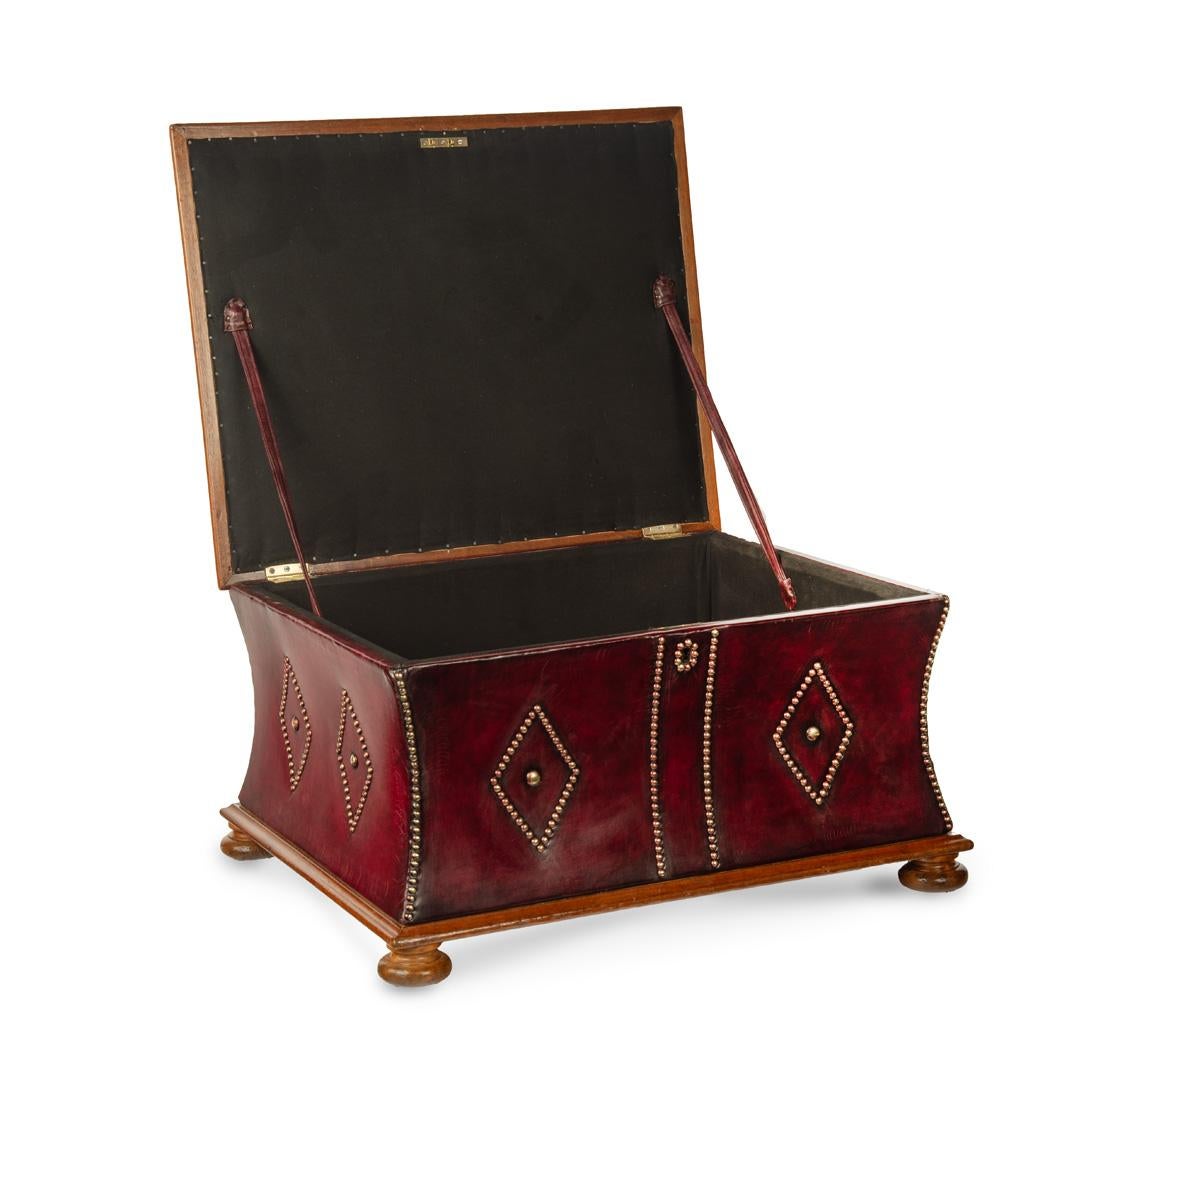 A late Victorian mahogany leathered box stool or Ottoman, of rectangular form, re-upholstered overall in distressed burgundy leather, the hinged lid deep-buttoned to form a seat, the sides decorated with close-nailed brass lozenges and edging, on